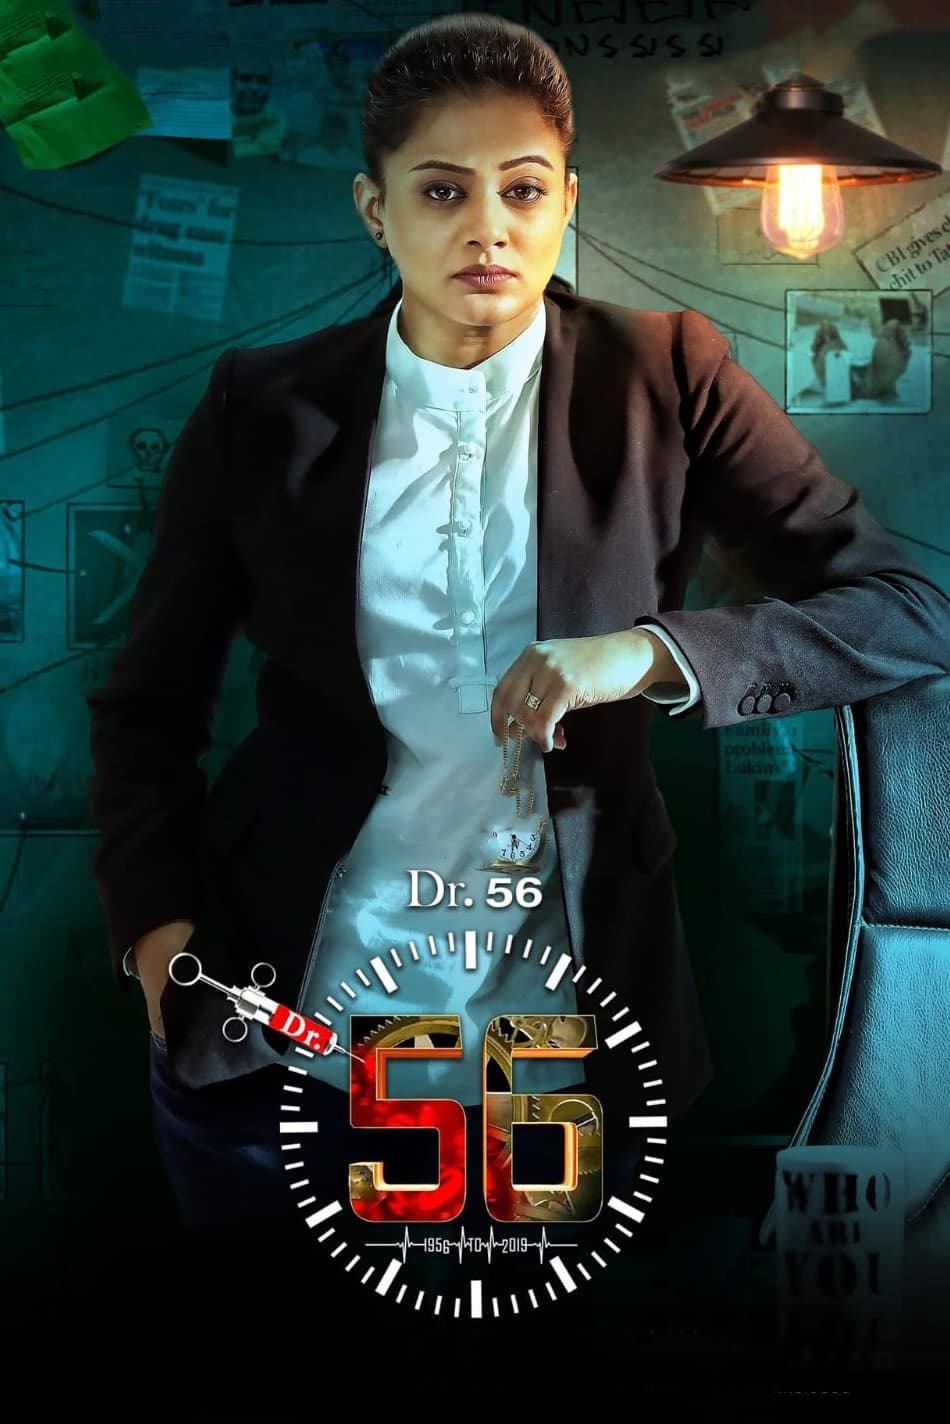 Poster for the movie "Dr. 56"